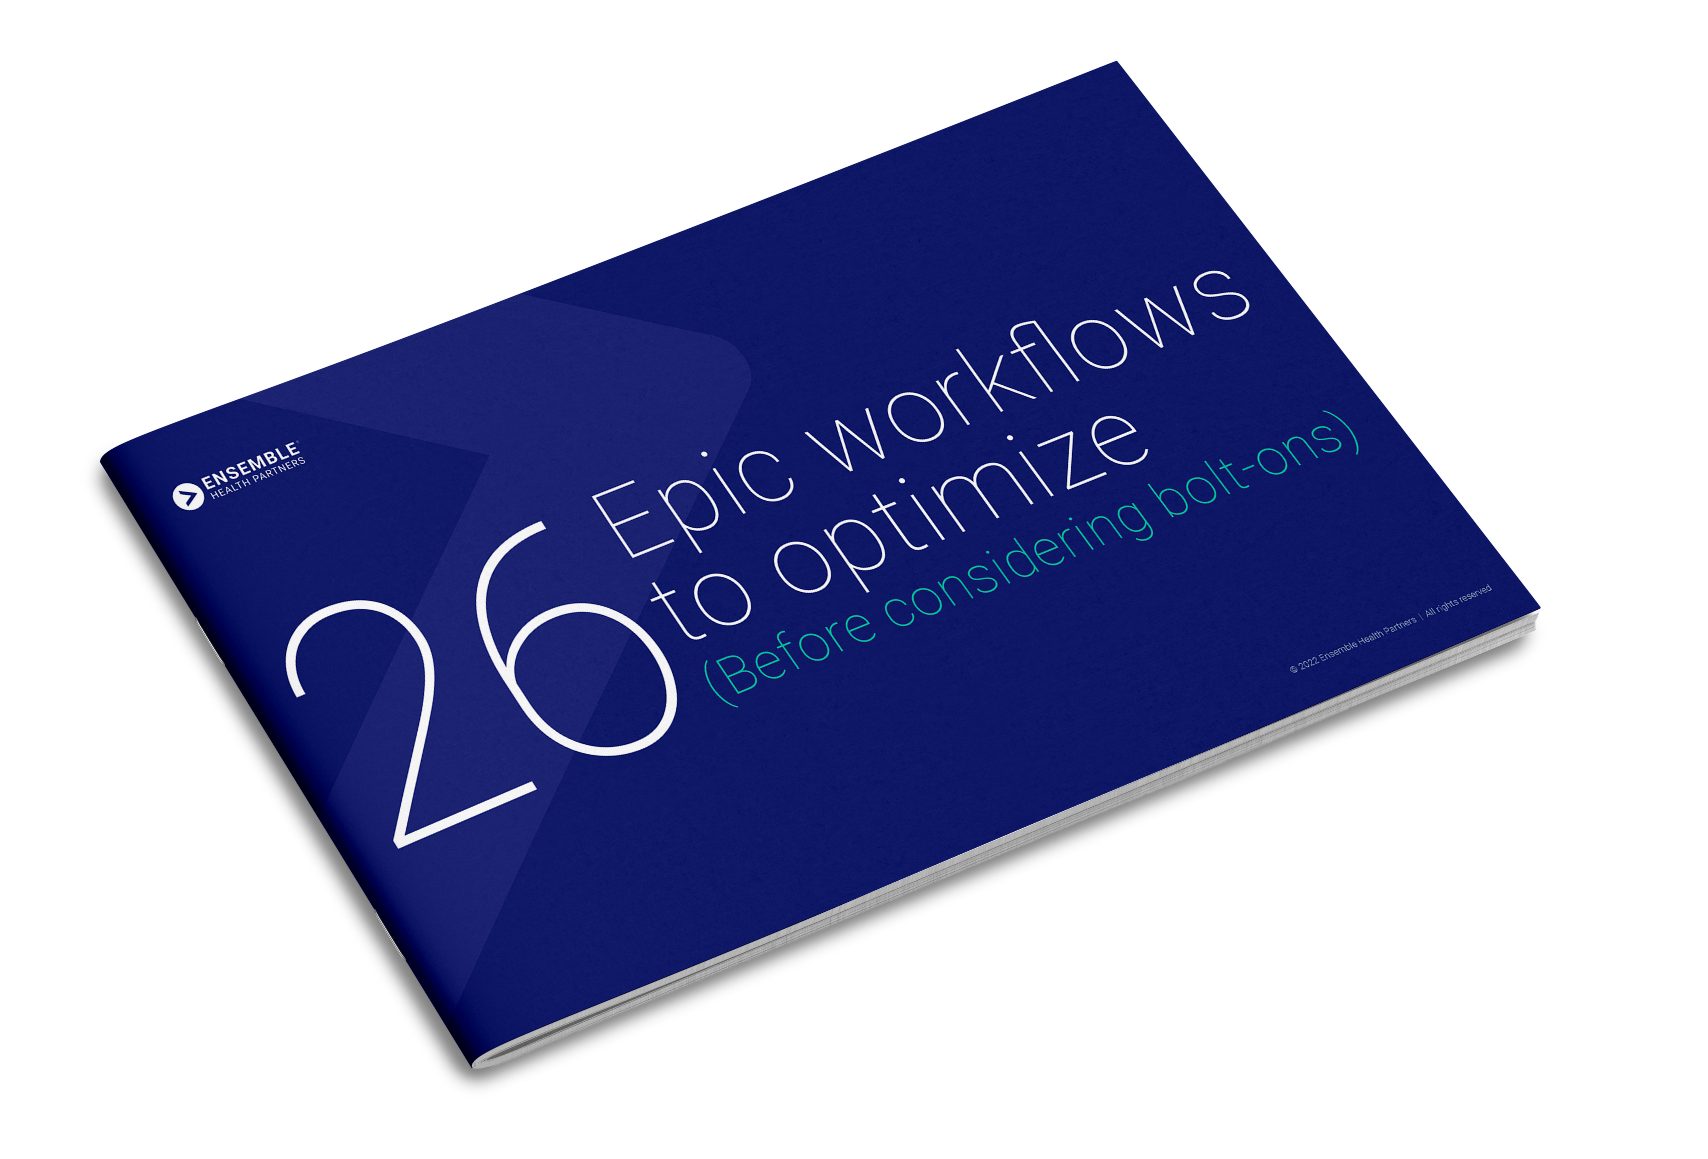 Top 26 Epic Workflows to Optimize_Cover